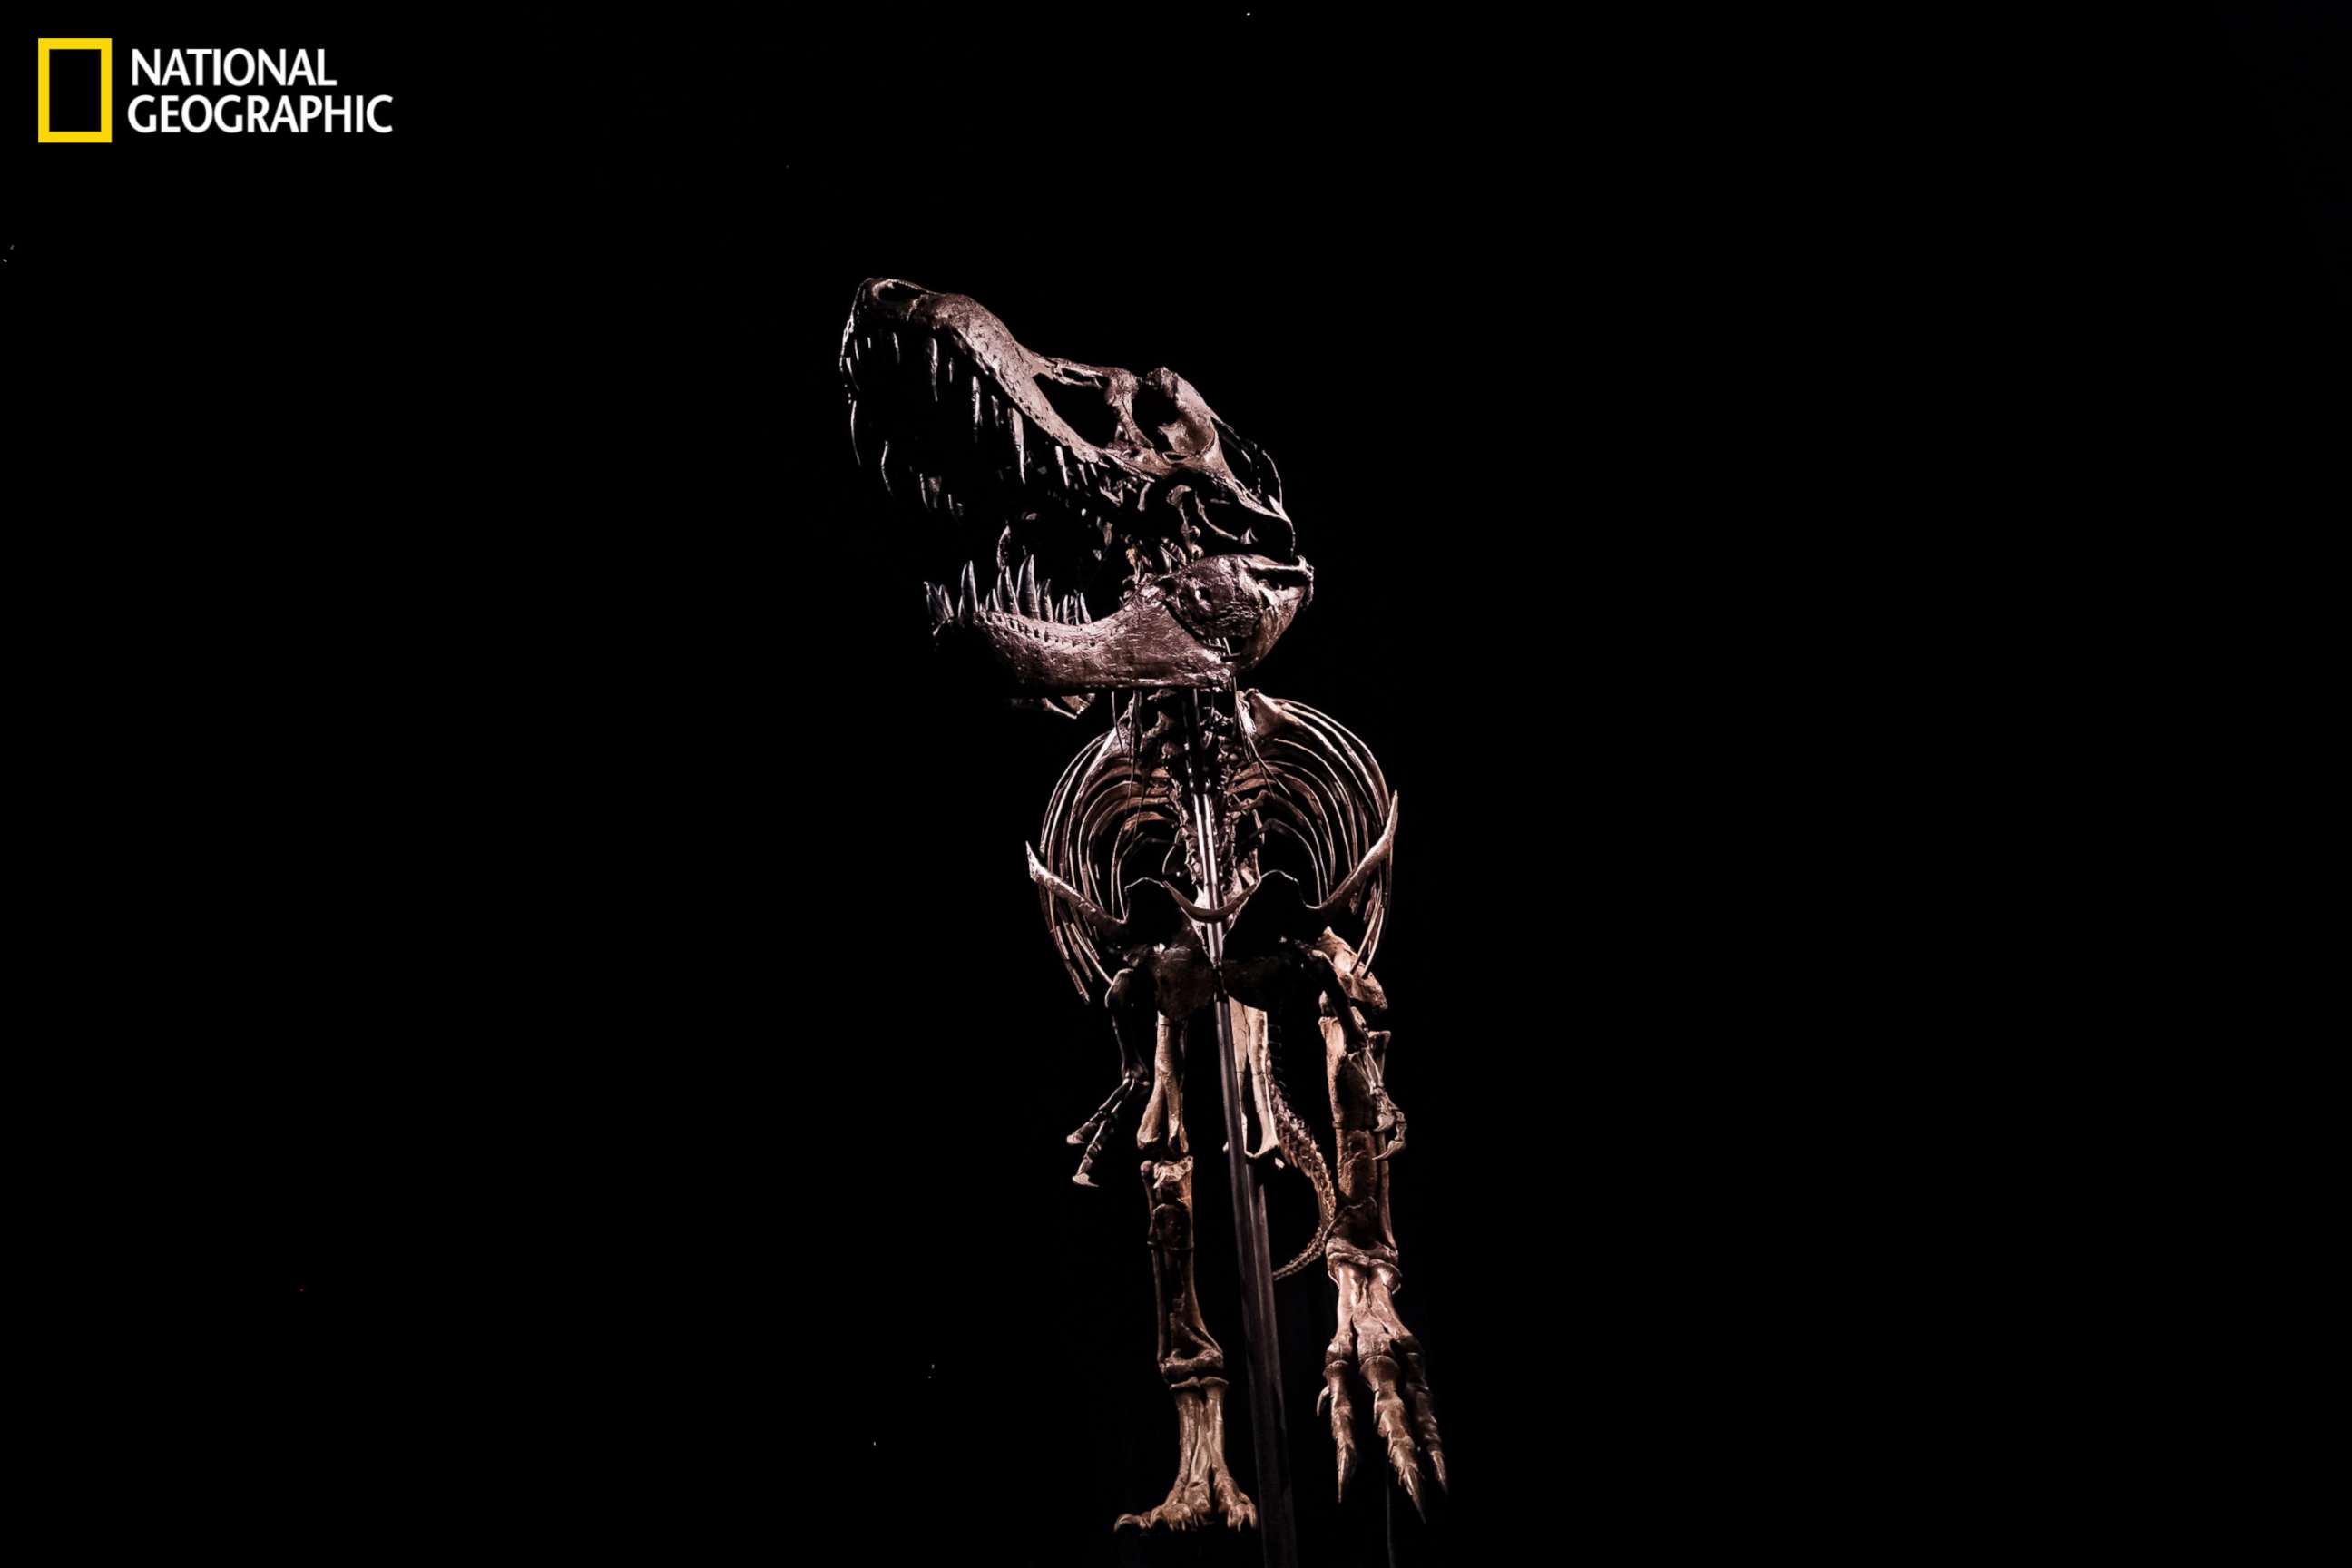 PHOTO: Stan the T rex, an enormous T rex skeleton, vanished after being sold at auction two years ago.